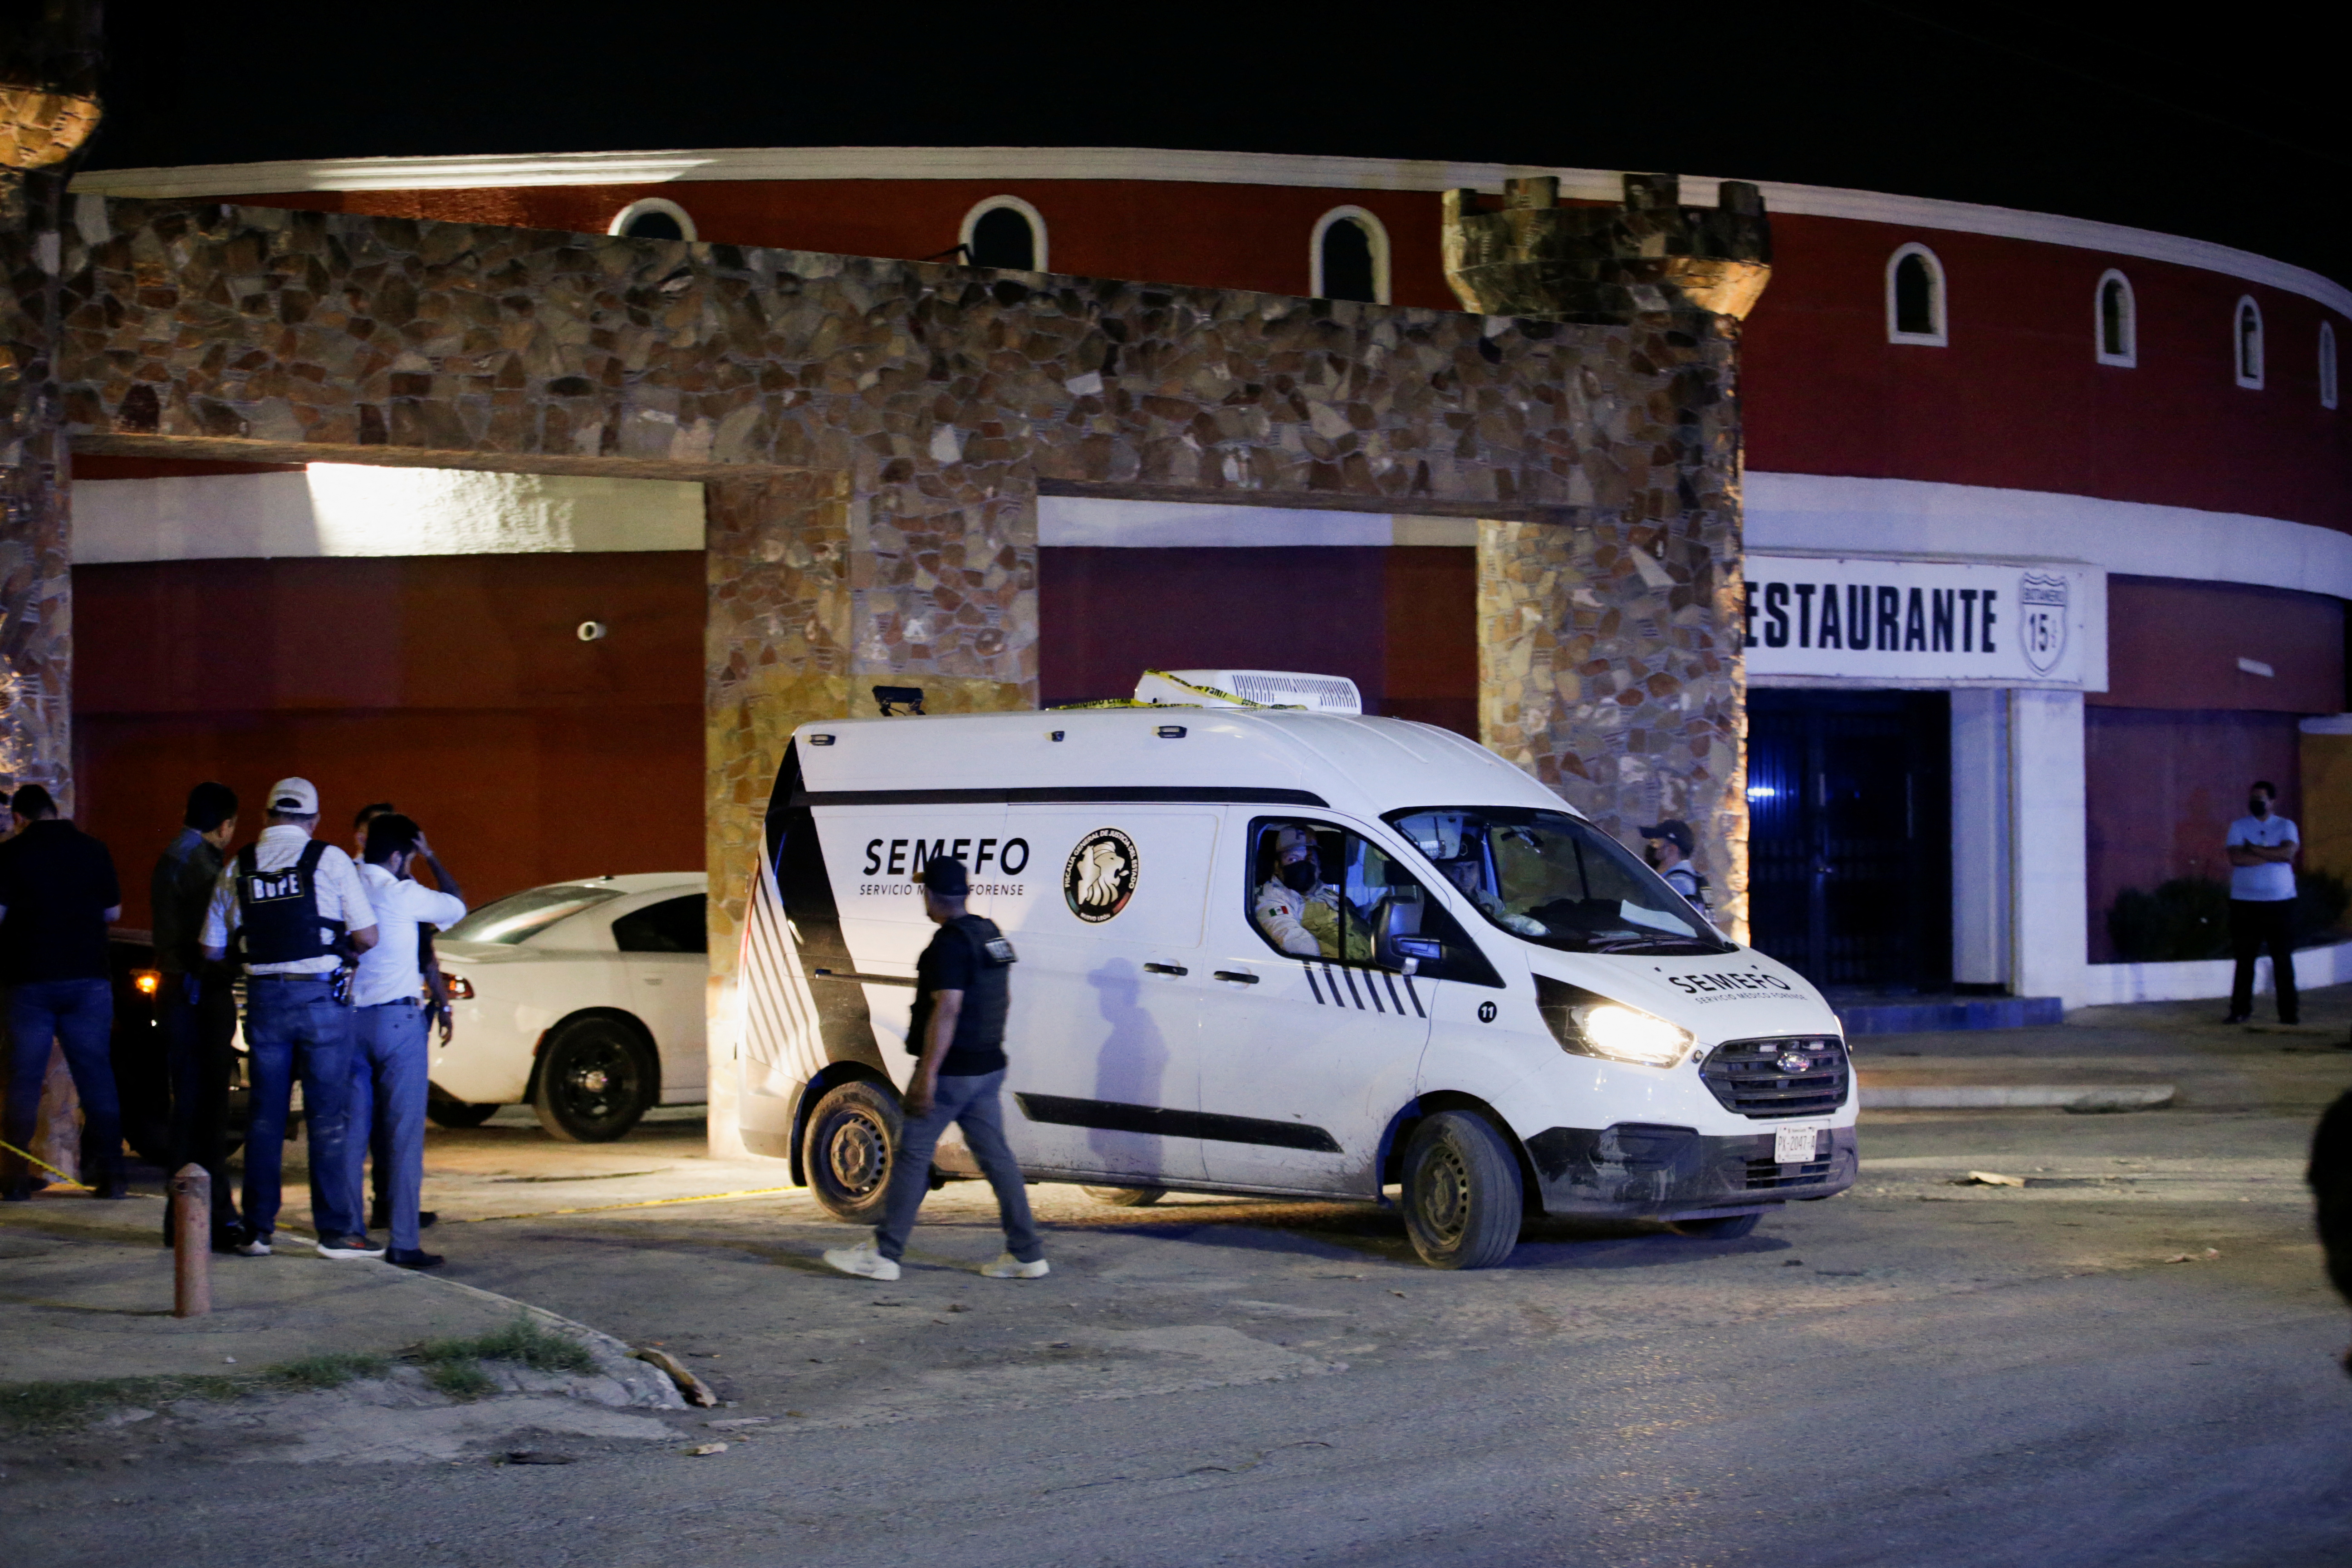 A forensic vehicle transporting the body of a woman found inside a water tank, leaves the Nueva Castilla Motel, near the place where Debanhi Escobar, an 18-year old student, has been missing since April 9, in Escobedo